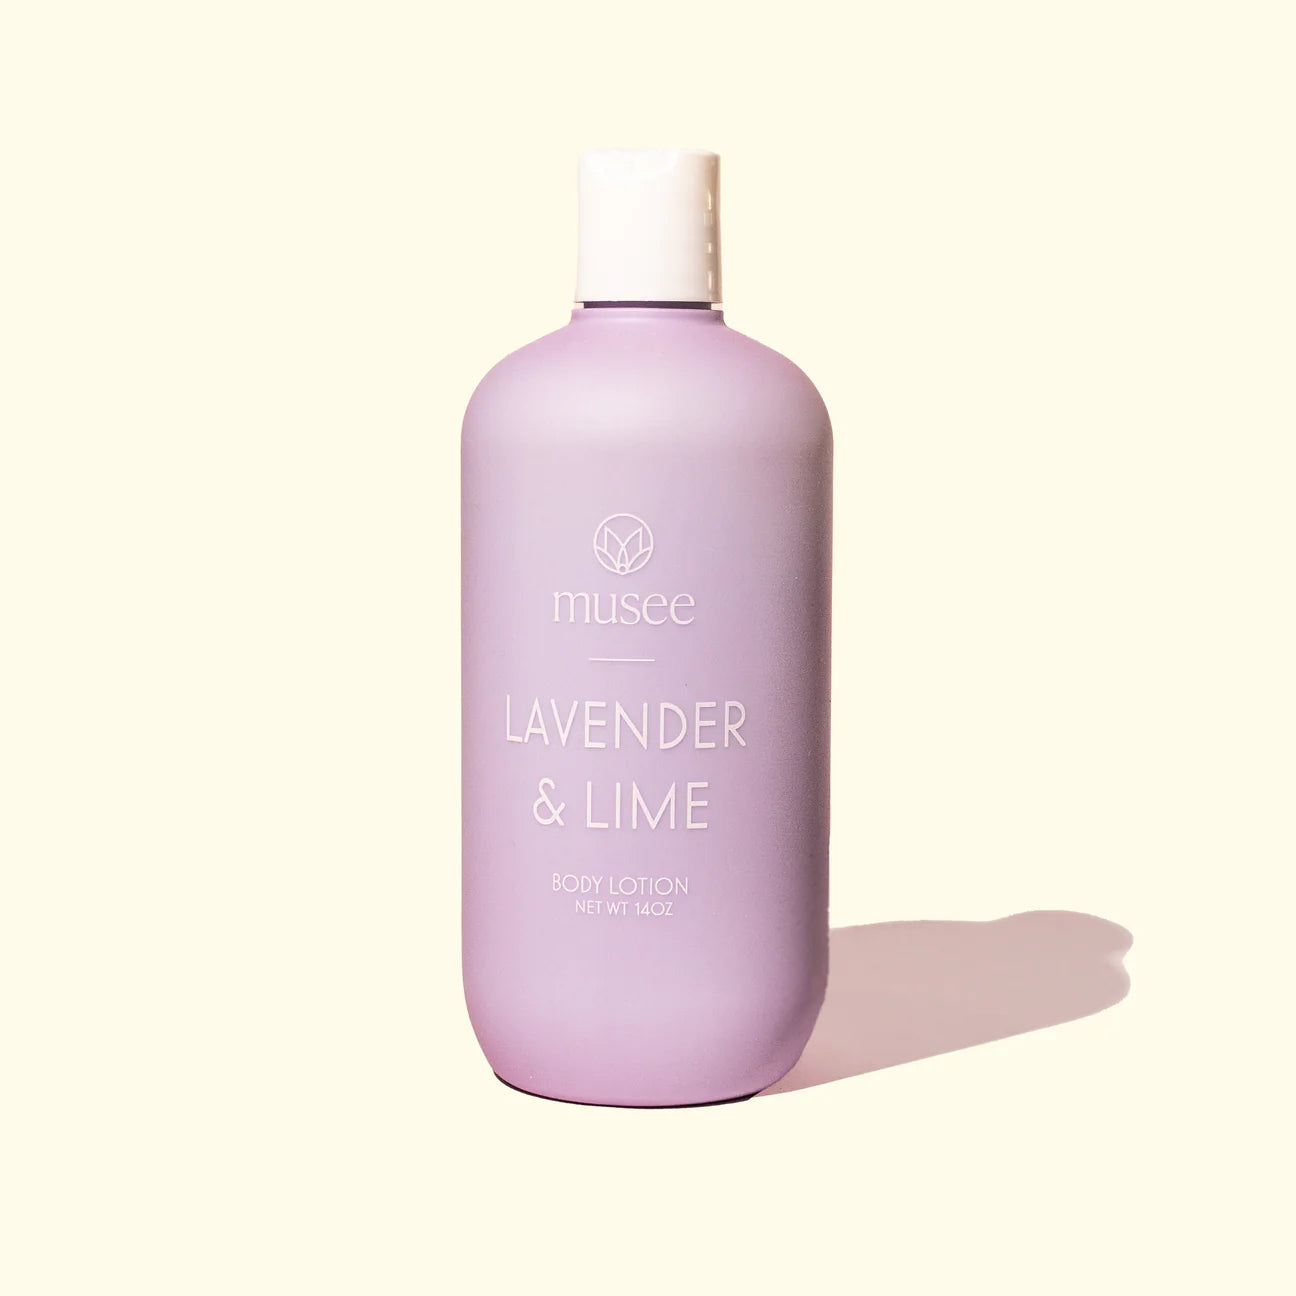 Description: A bottle of Musee Lavender+Lime Body Lotion on a white background.